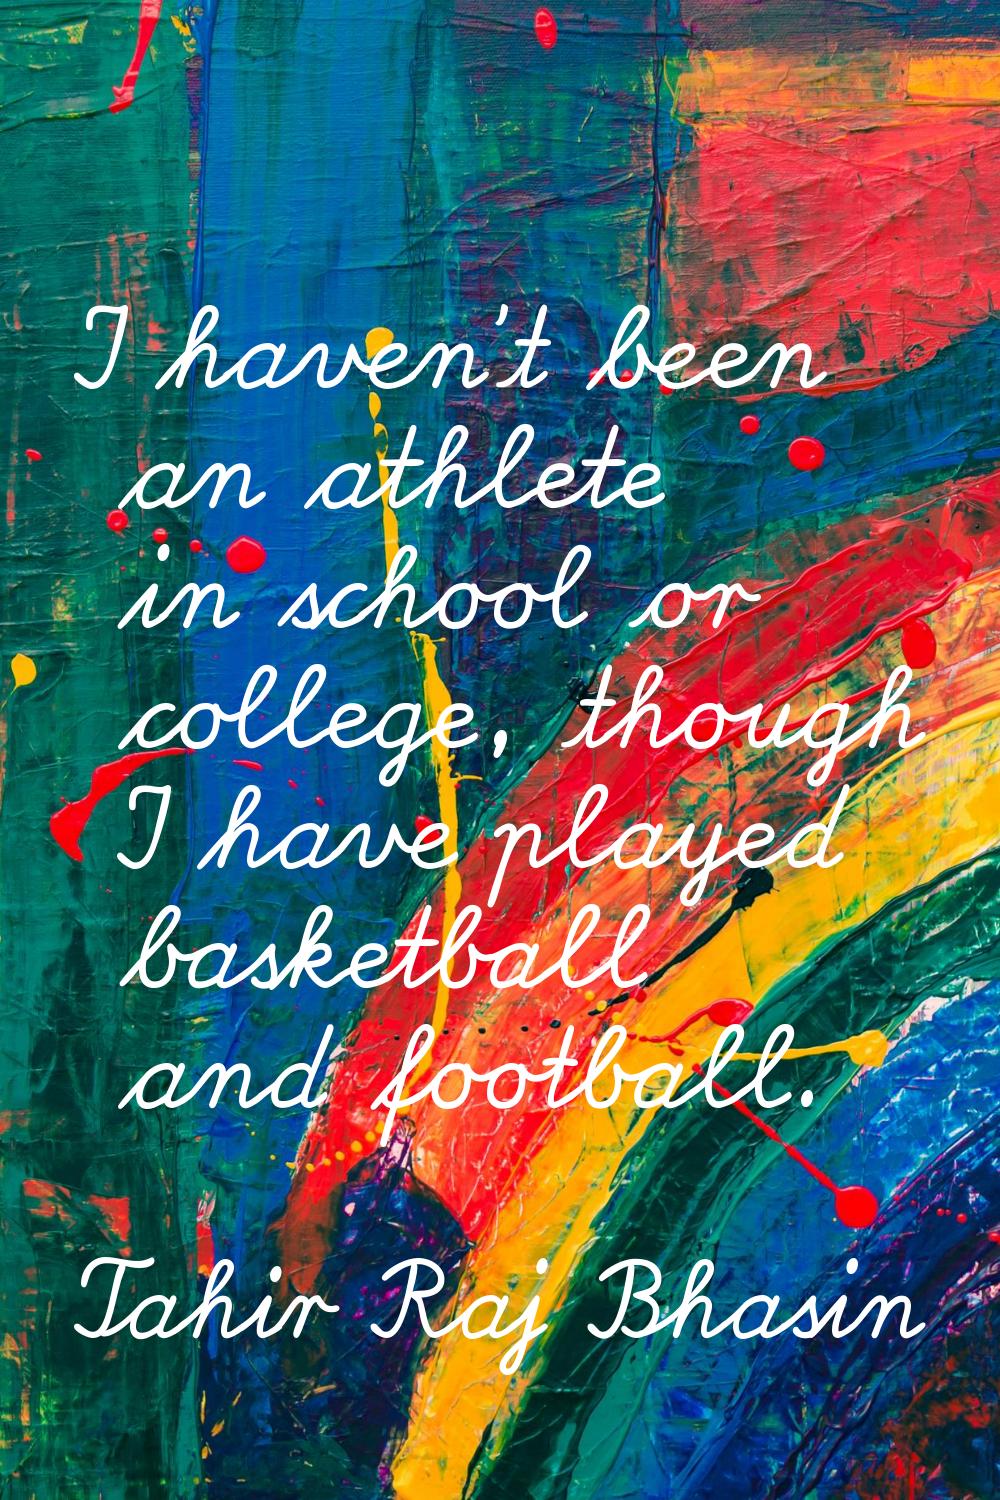 I haven't been an athlete in school or college, though I have played basketball and football.